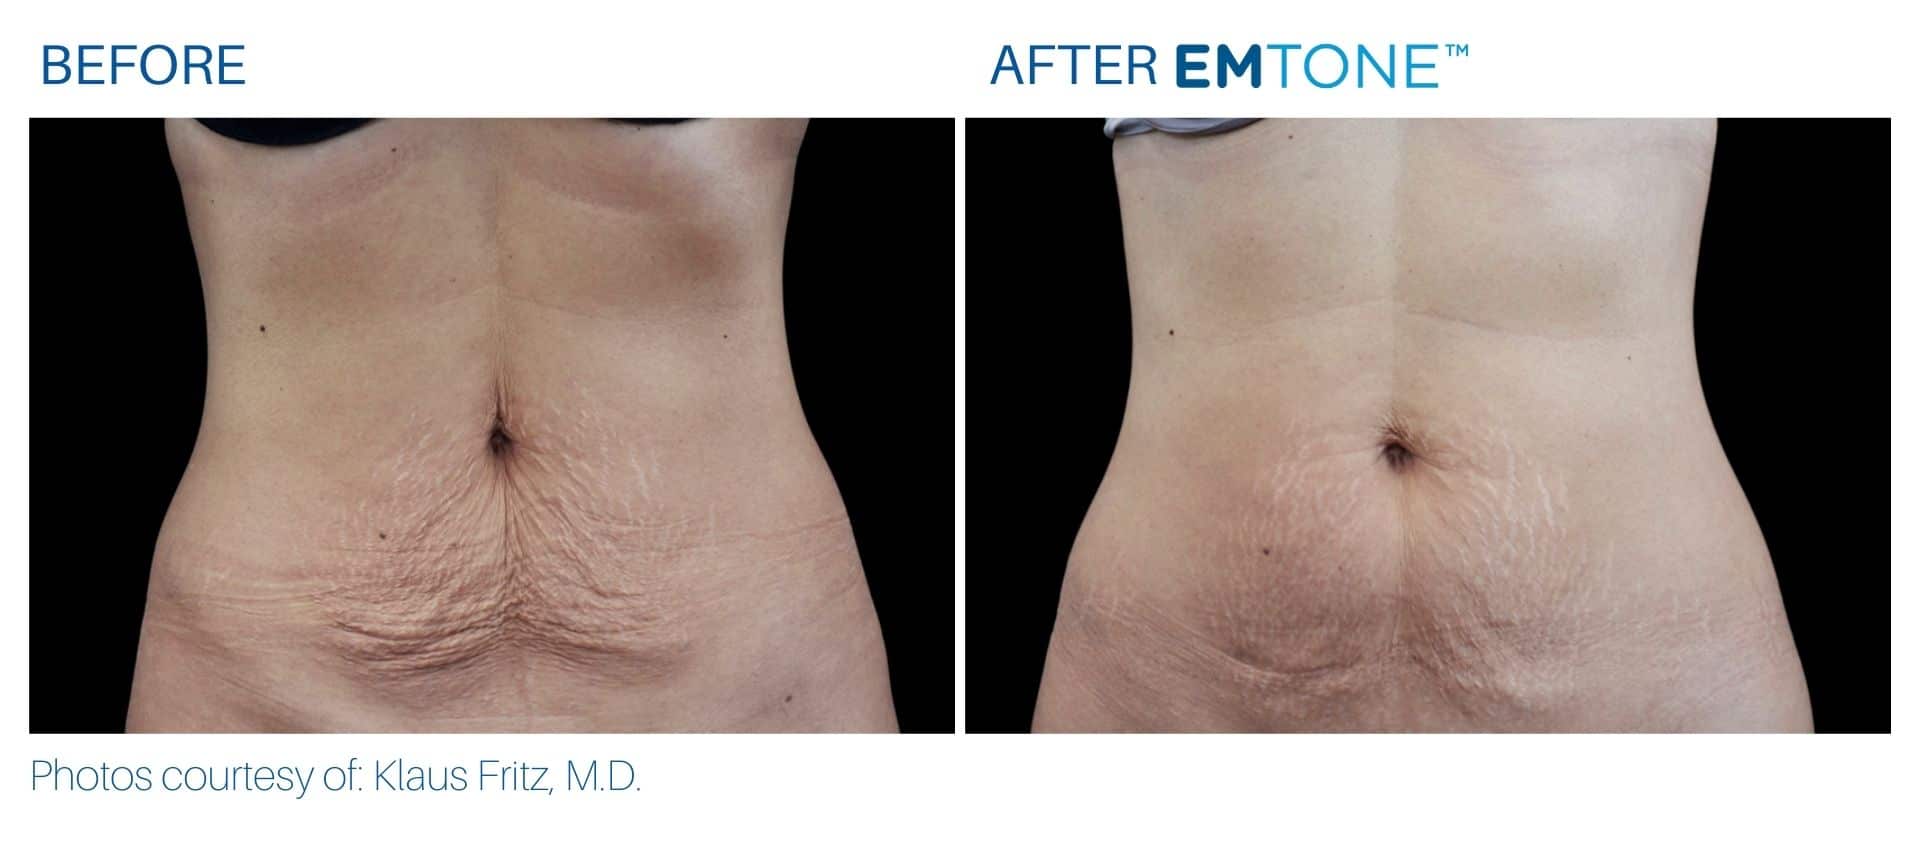 Emtone treatment on the abdomen before and after treatment on abdomen at Capitol Contours in Alexandria, VA.